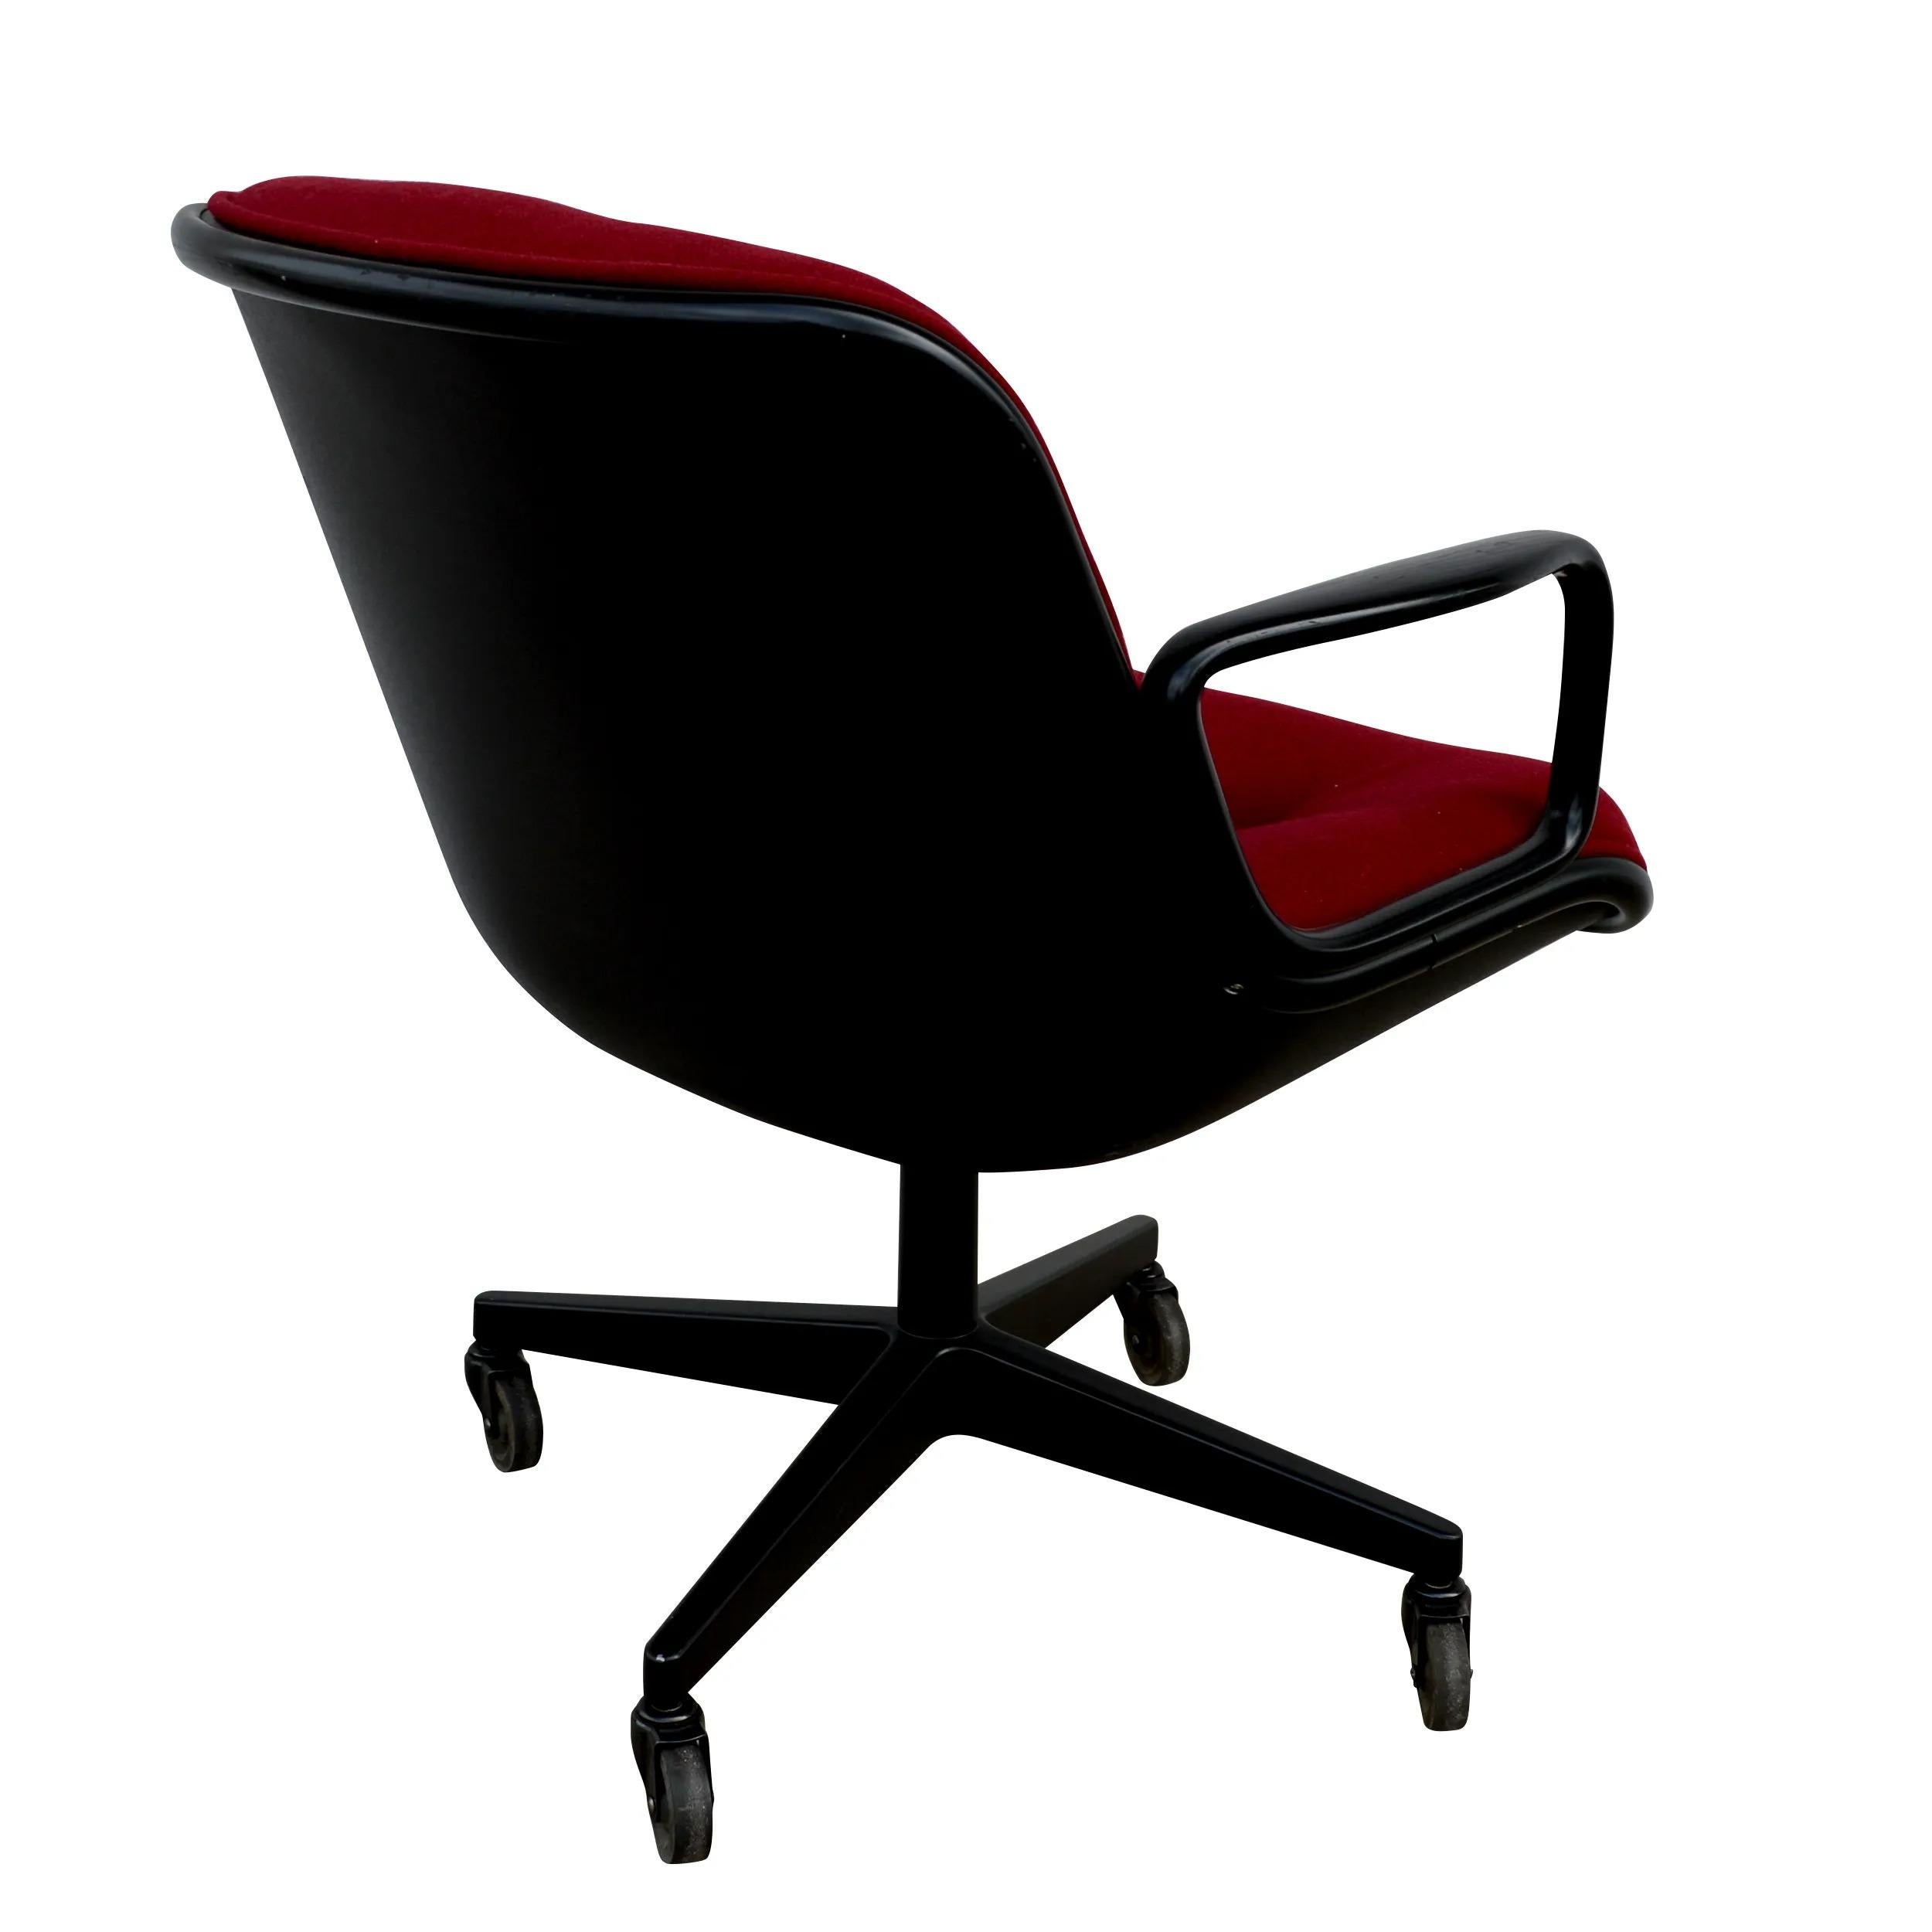 Metal One Red Executive Knoll Pollock Chair For Sale